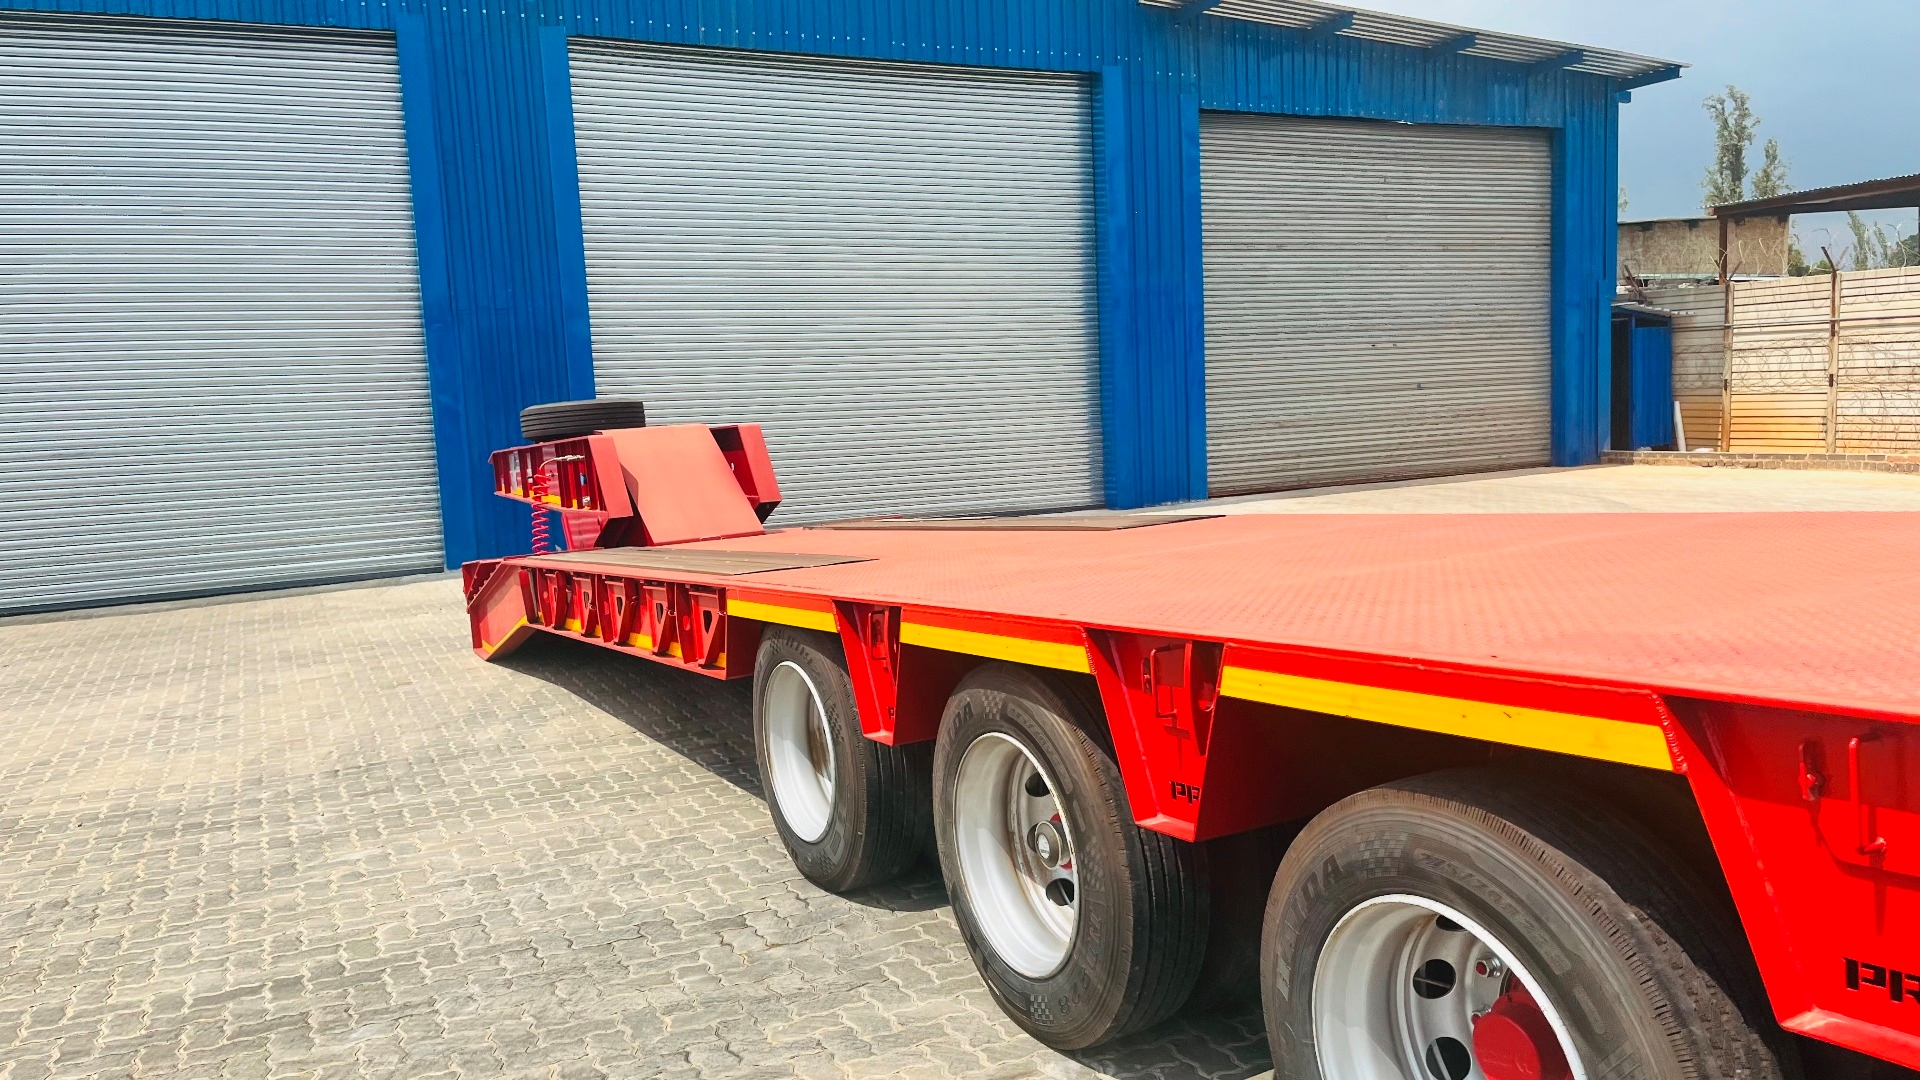 PR Trailers Trailers Slope deck HYDRAULIC QUAD AXLE 2022 for sale by Pomona Road Truck Sales | Truck & Trailer Marketplaces